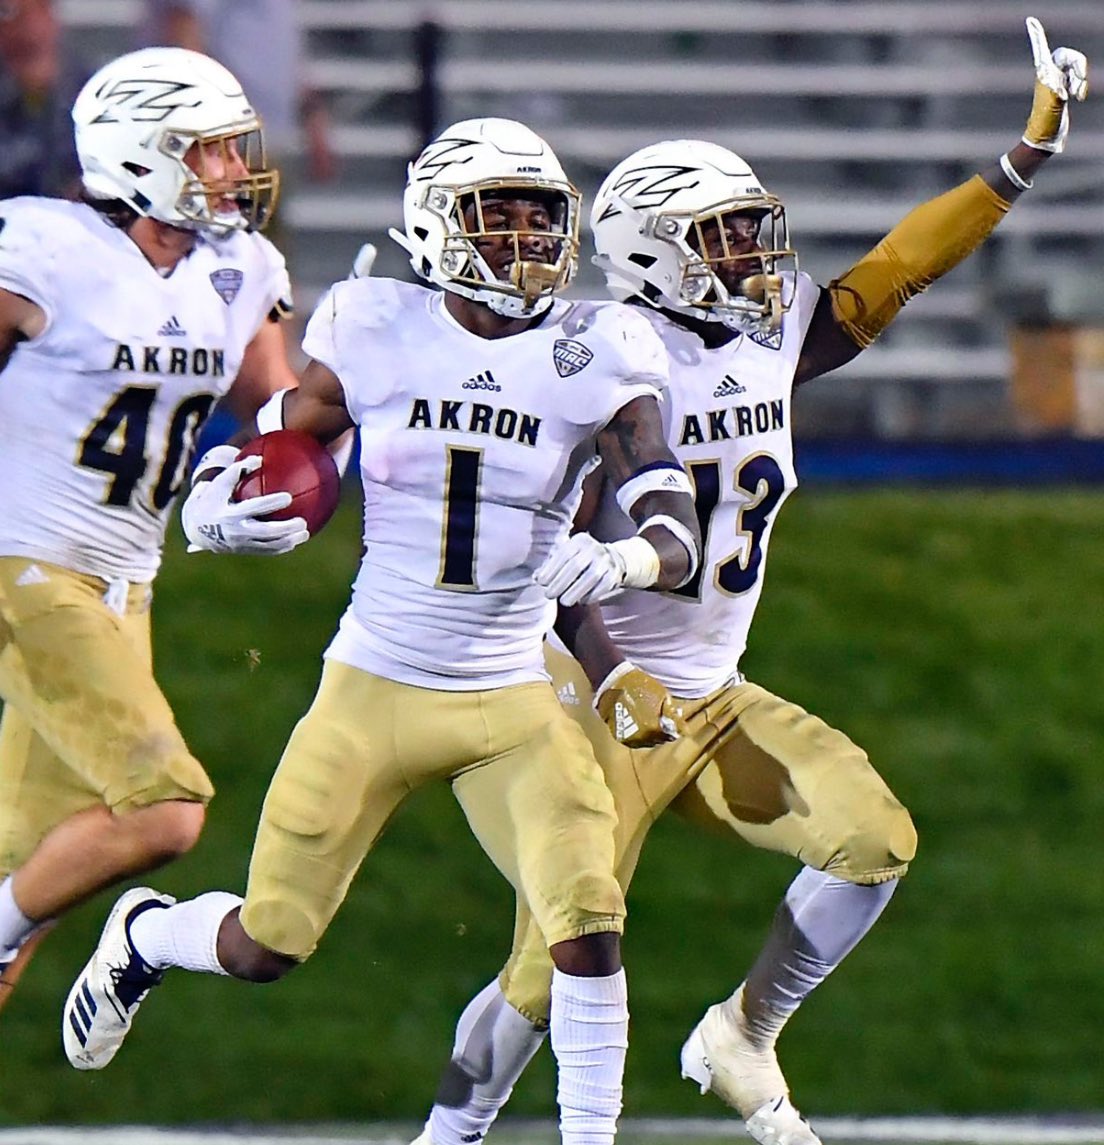 Blessed to receive my 8th Division 1 offer from The university of Akron 🤍!! @Coach_J_Rod @gahannafootball @Coach_MHolliday #Hunt